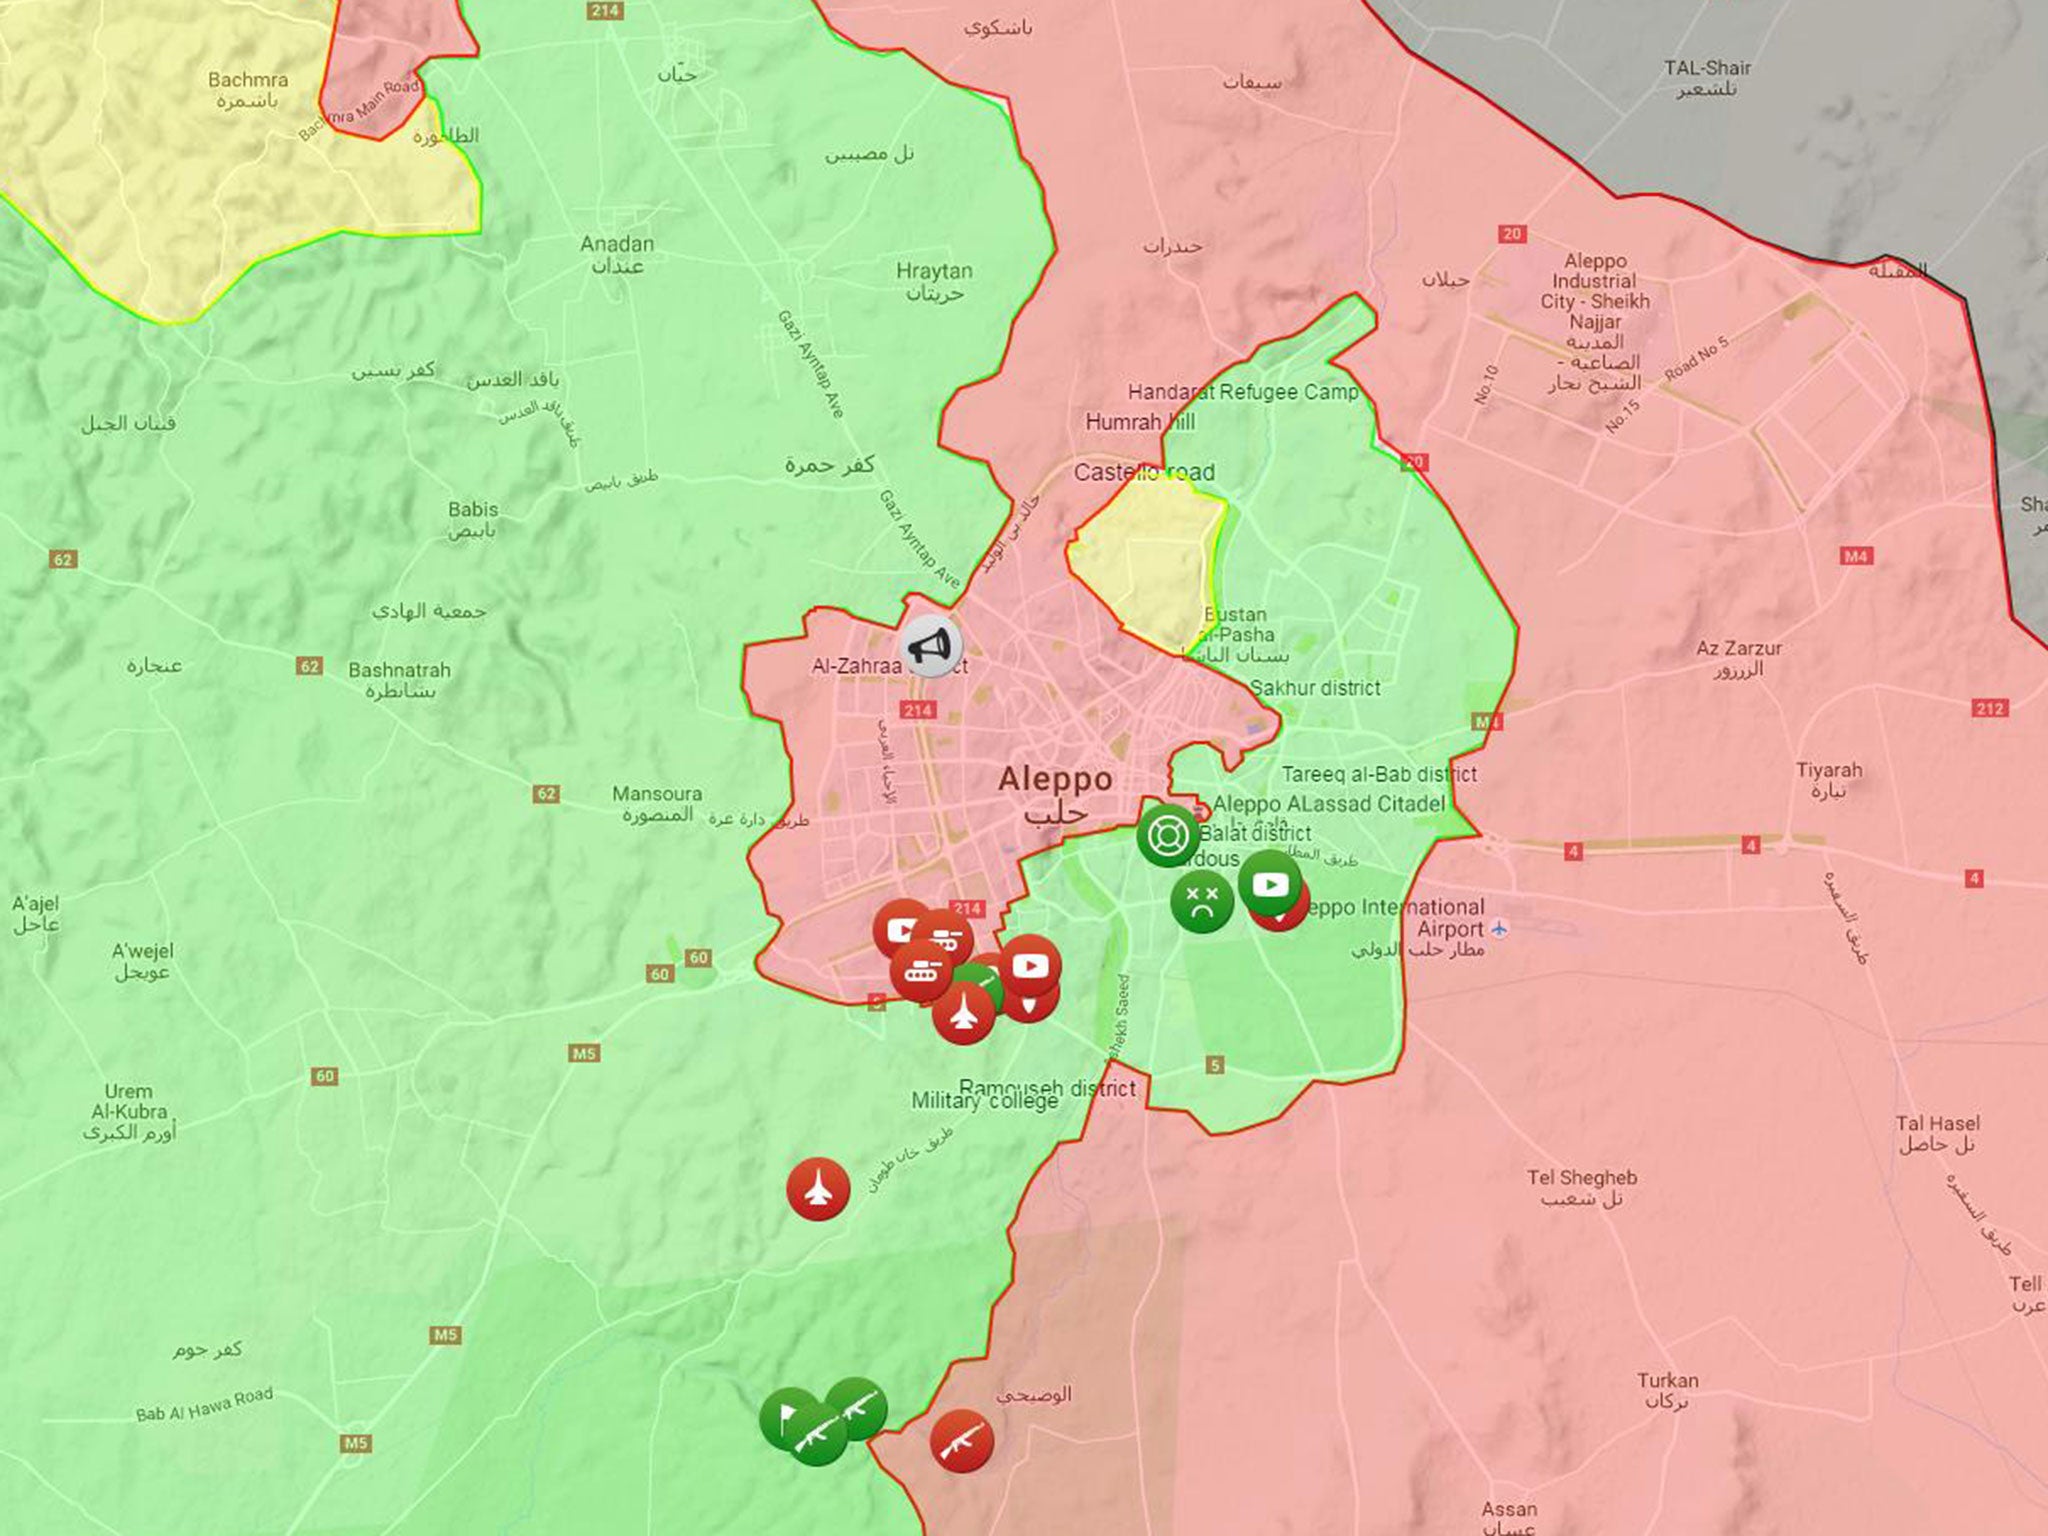 The situation in Aleppo on 18 August 2016, with rebel territory and attacks seen in green, regime in red and Kurdish in yellow.